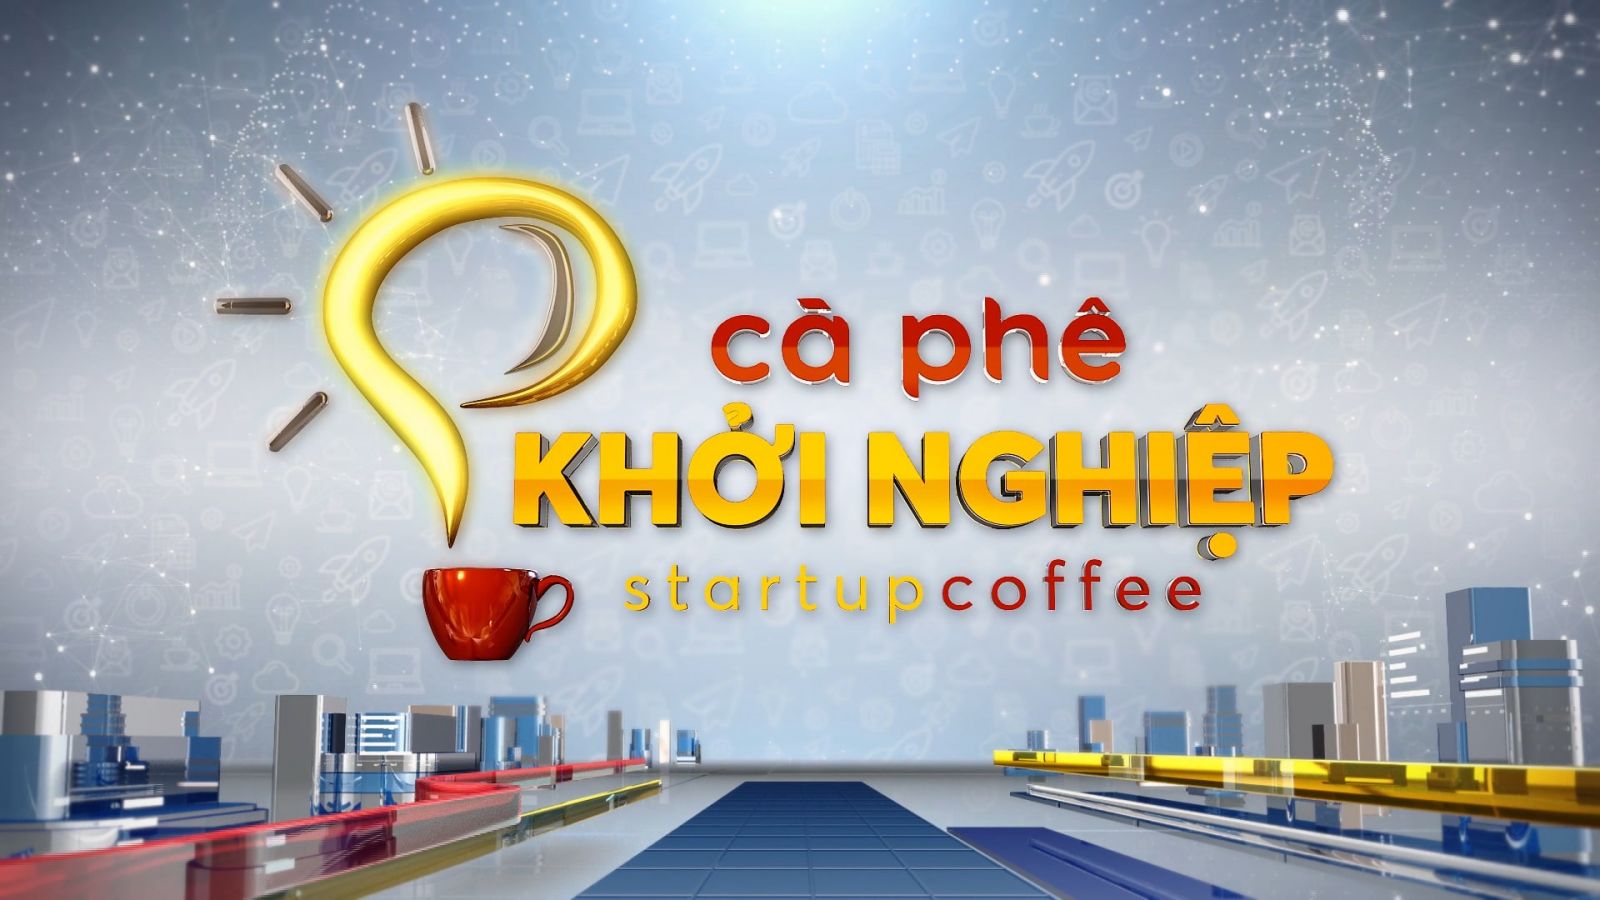 mua-cafe-xay-nguyen-chat-hay-toi-startup-coffee